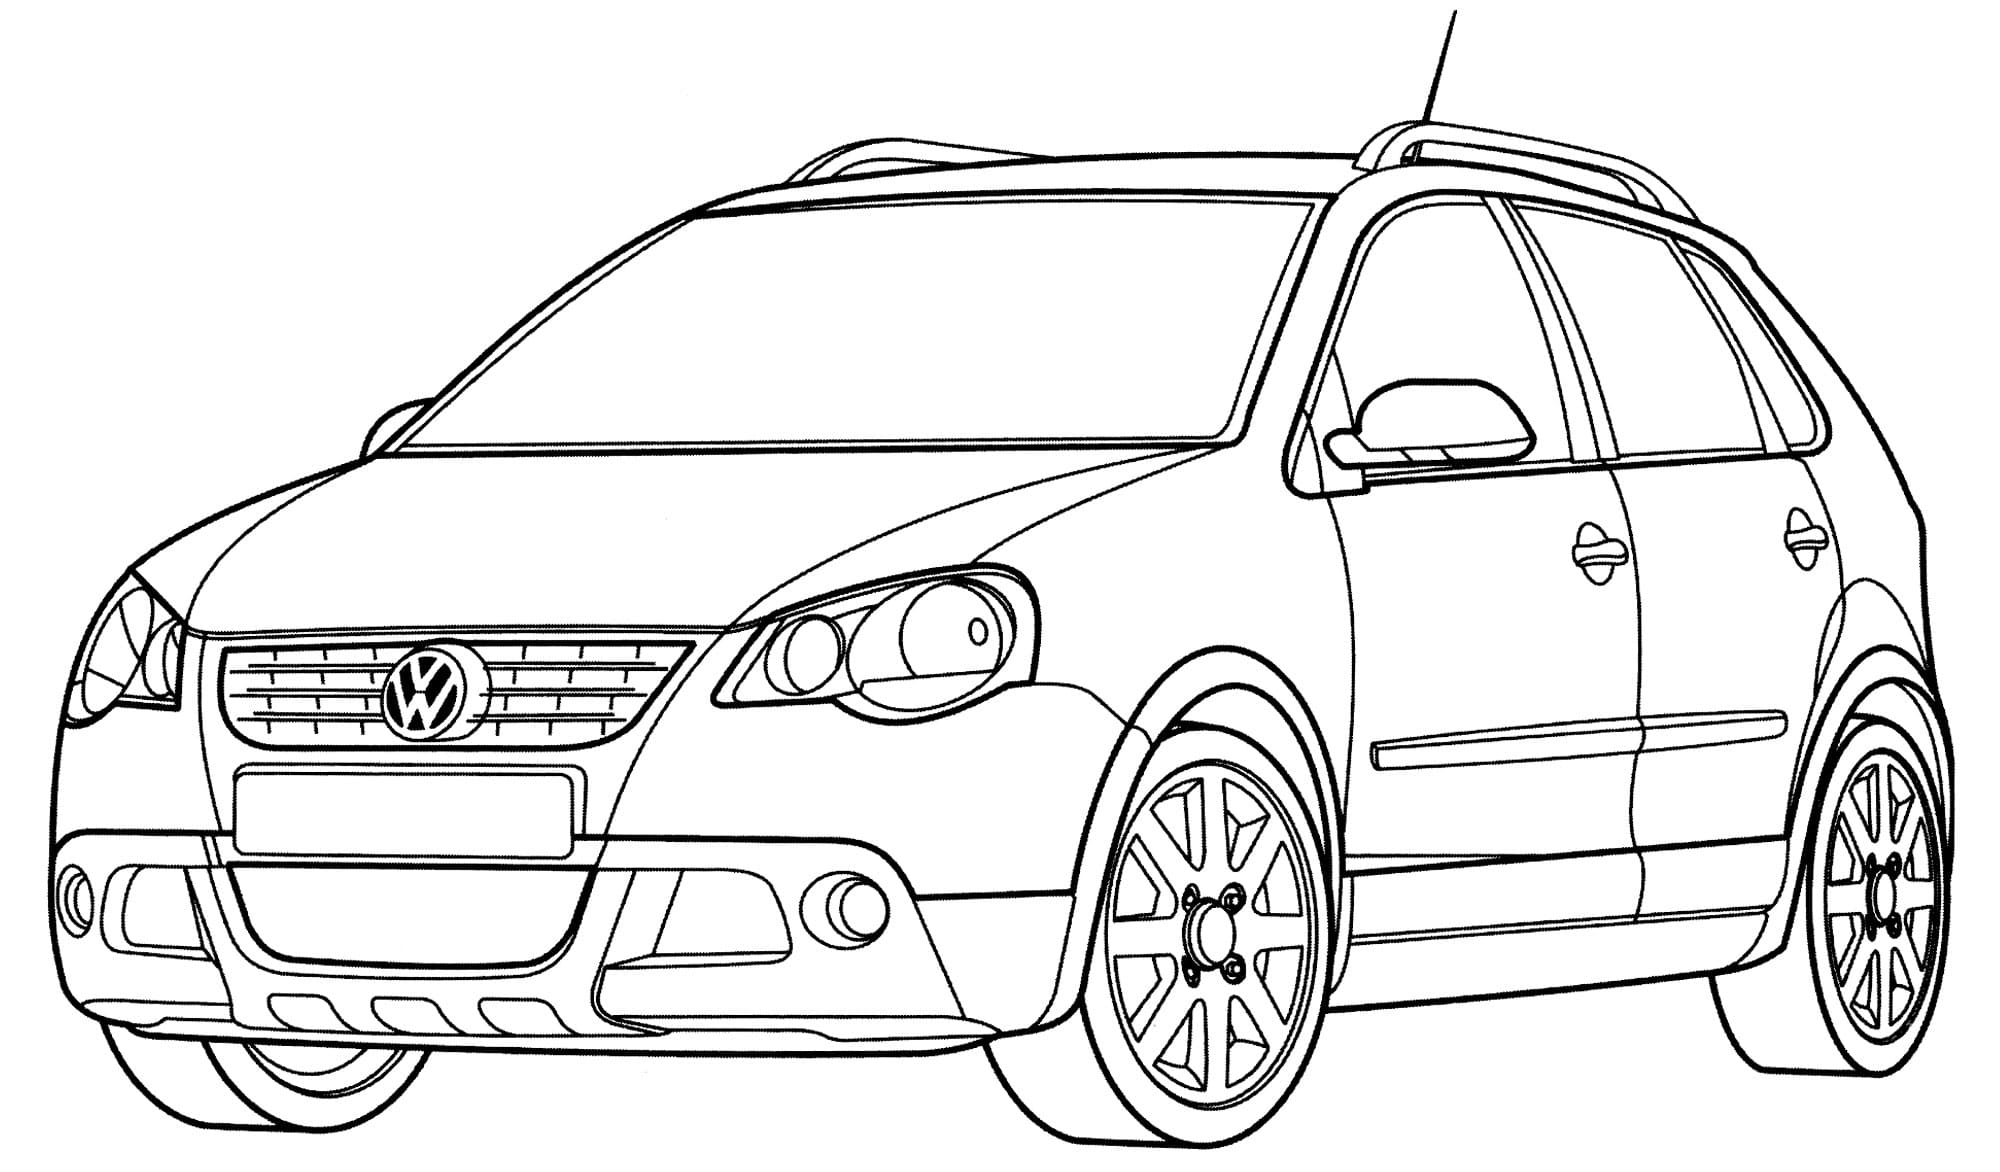 Volkswagen Coloring Pages | Coloring Pages for Kids